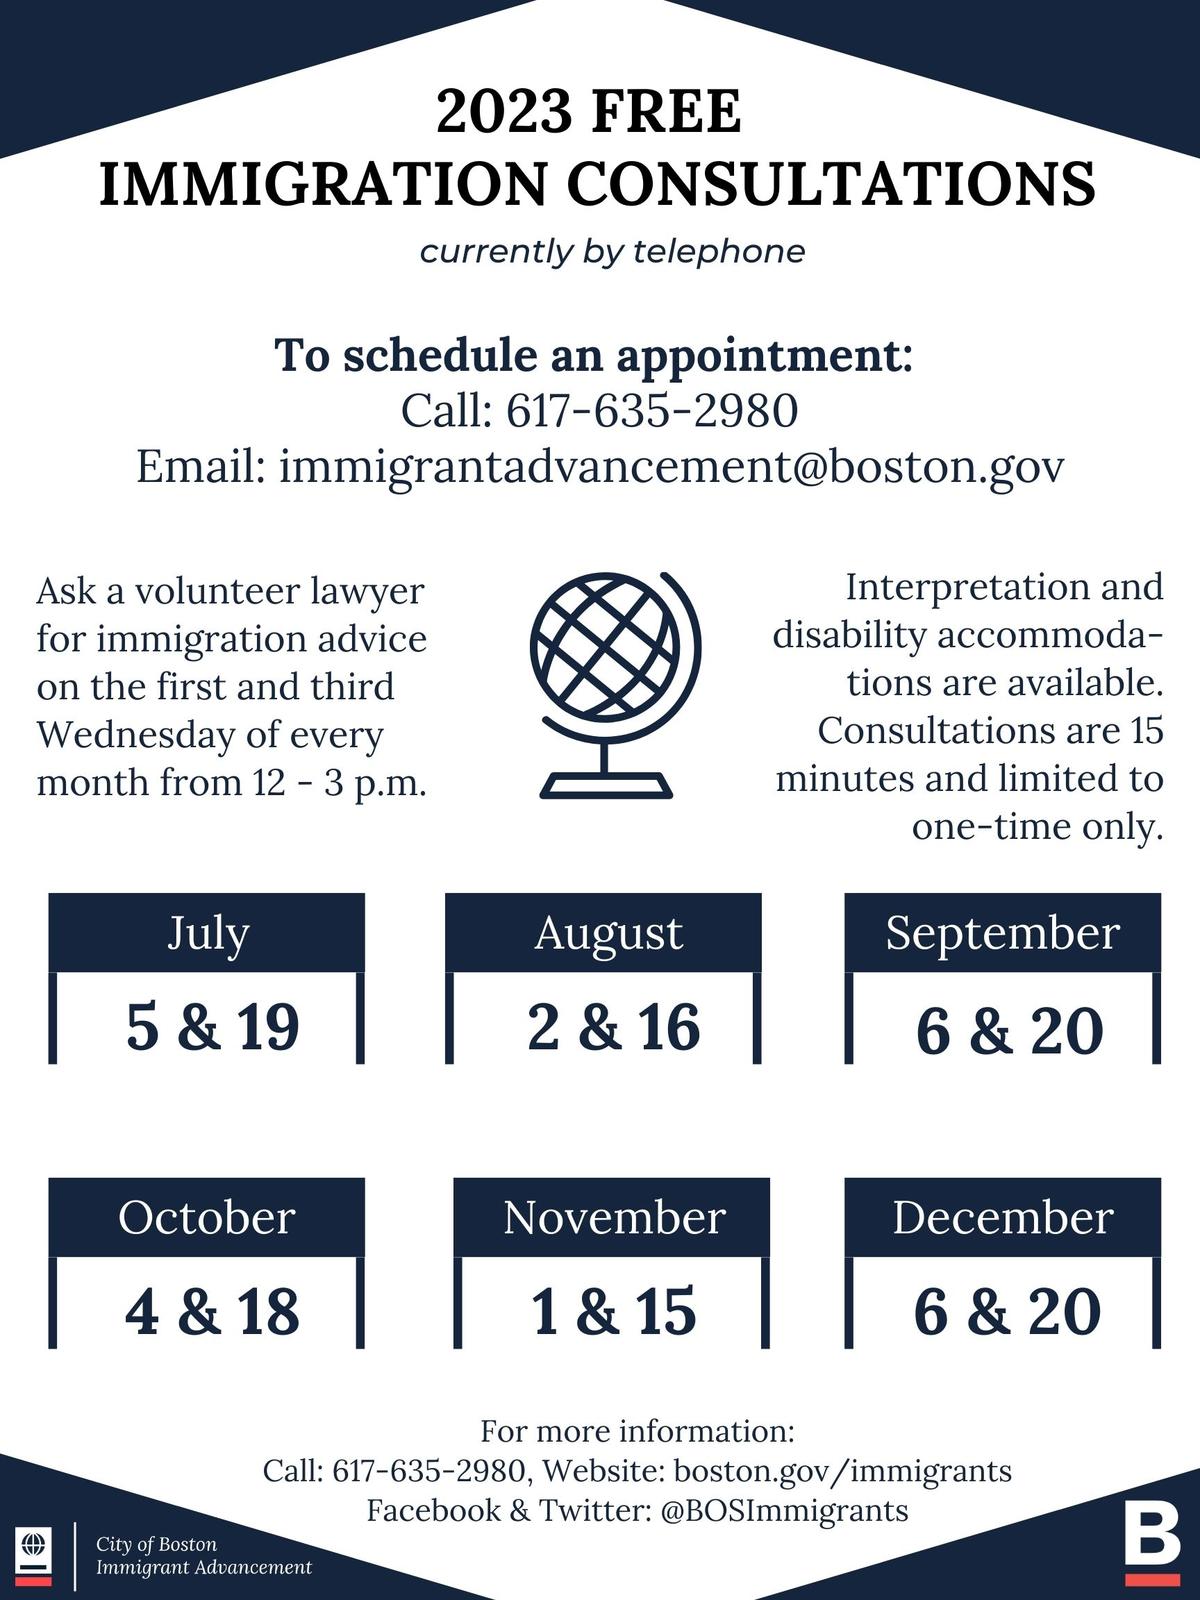 Flyer with dates for Free Immigration Consultations from July to December 2023